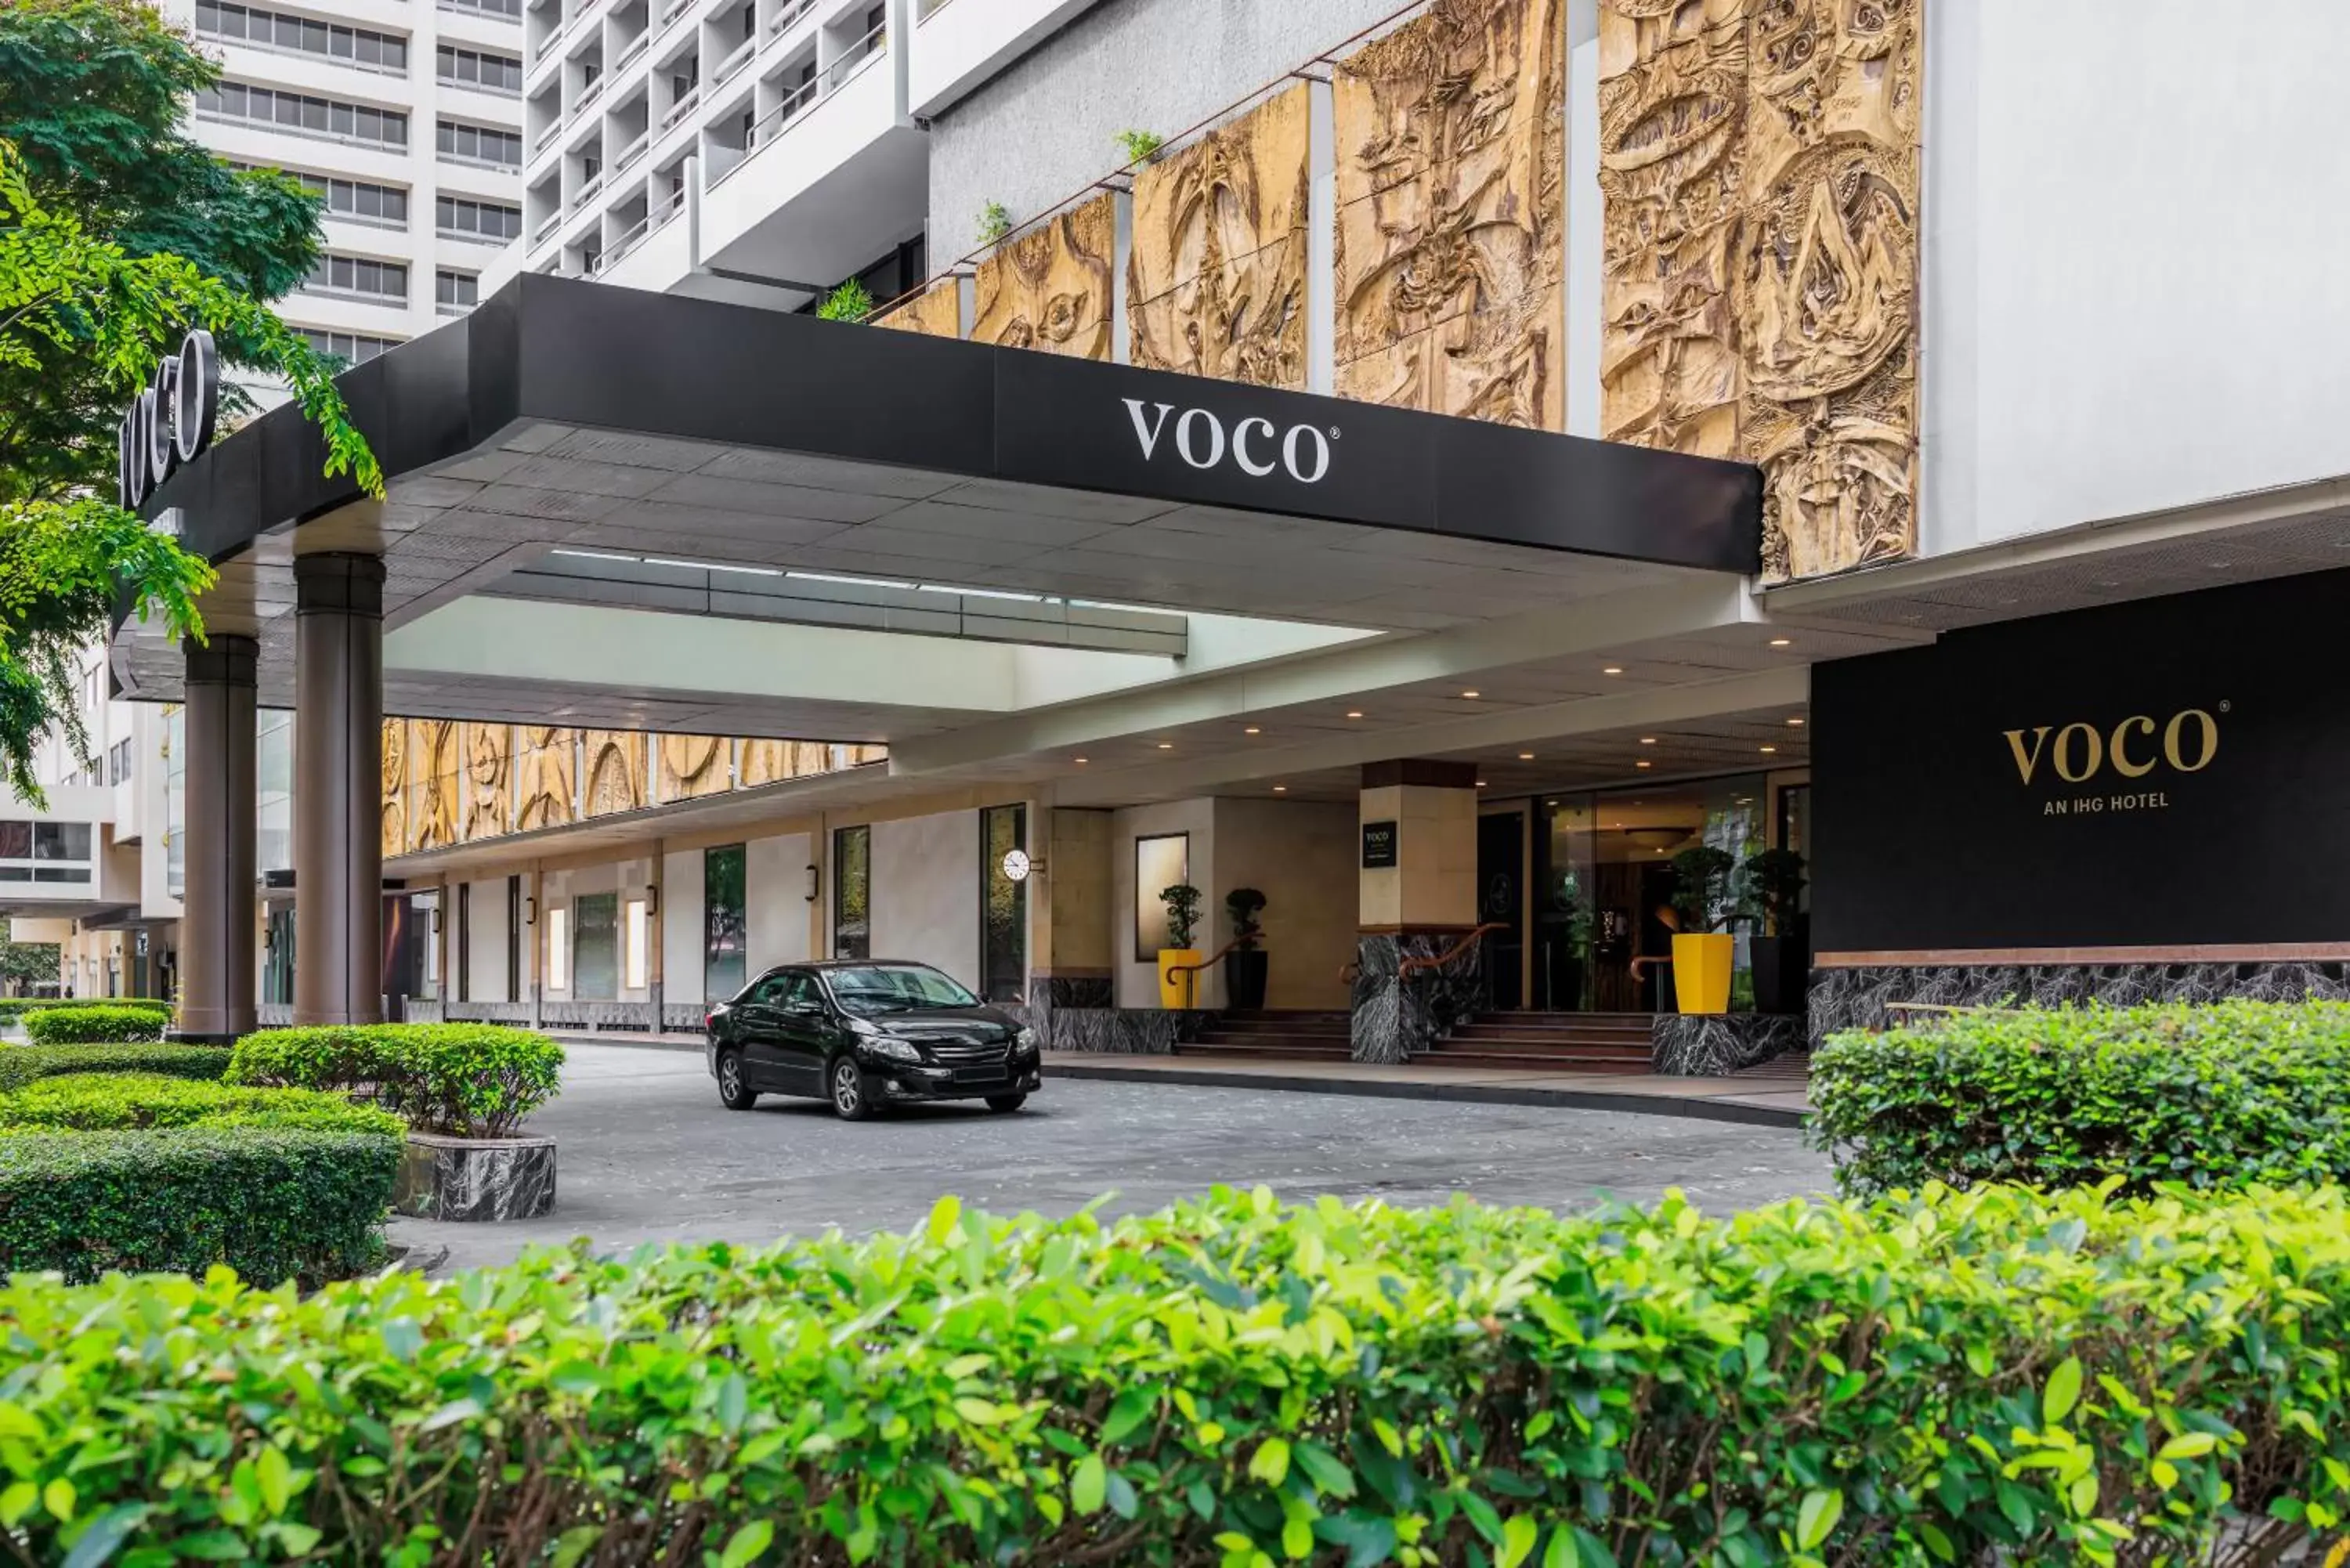 Property Building in voco Orchard Singapore, an IHG Hotel